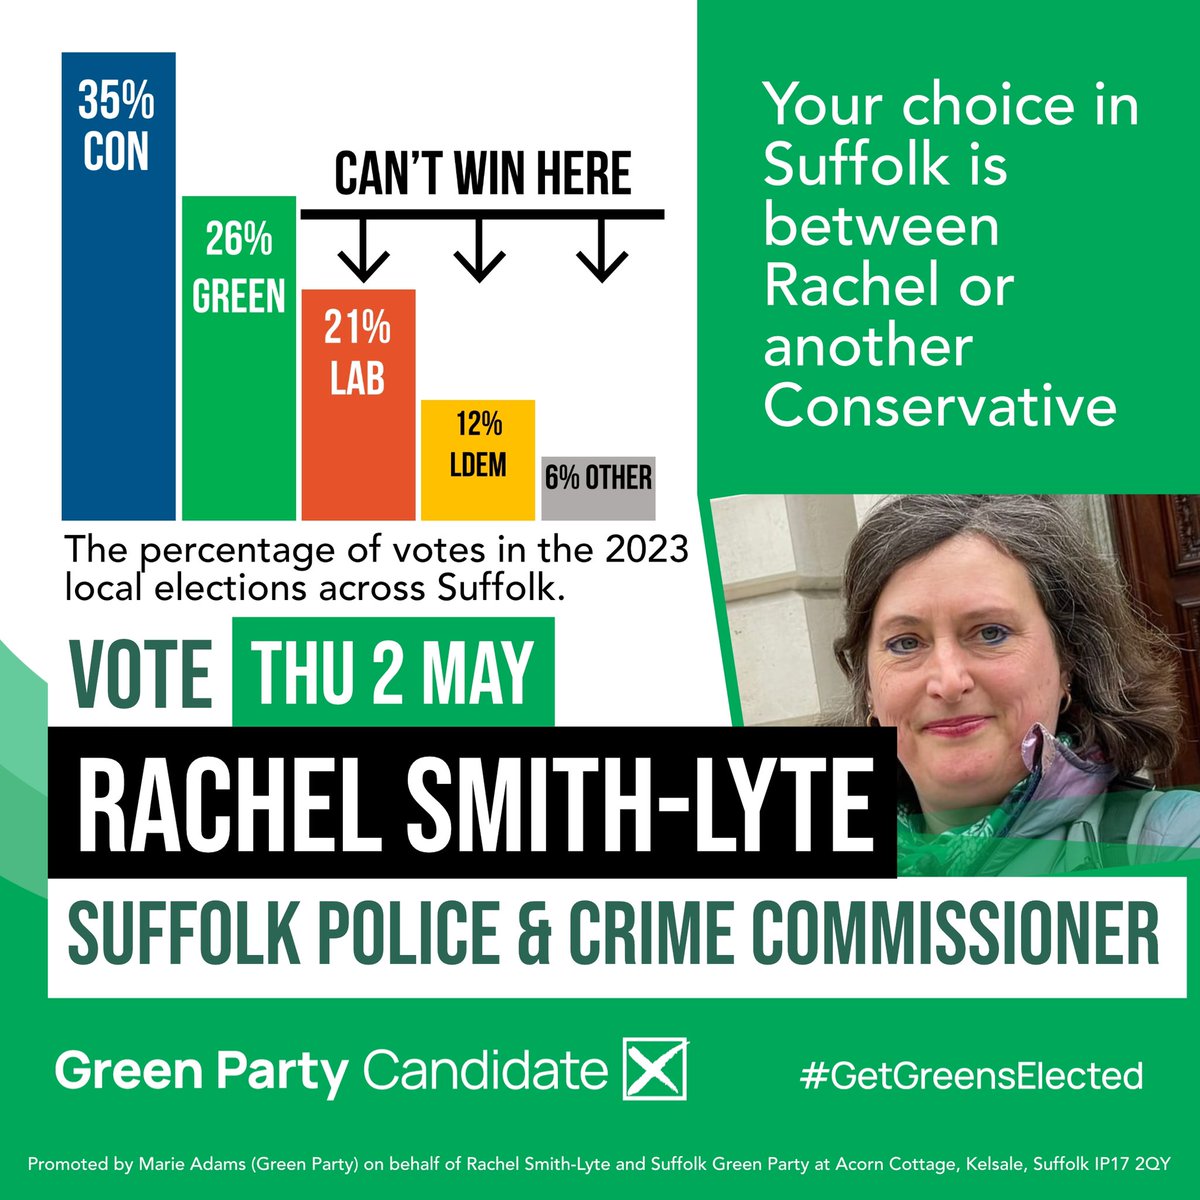 On 2nd May, voters across Suffolk will vote to elect their new Police and Crime Commissioner. It is going to be a close race between @TheGreenParty and the Conservatives, with last years local election results showing that @SmithLyte is the main challenger. #GetGreensElected